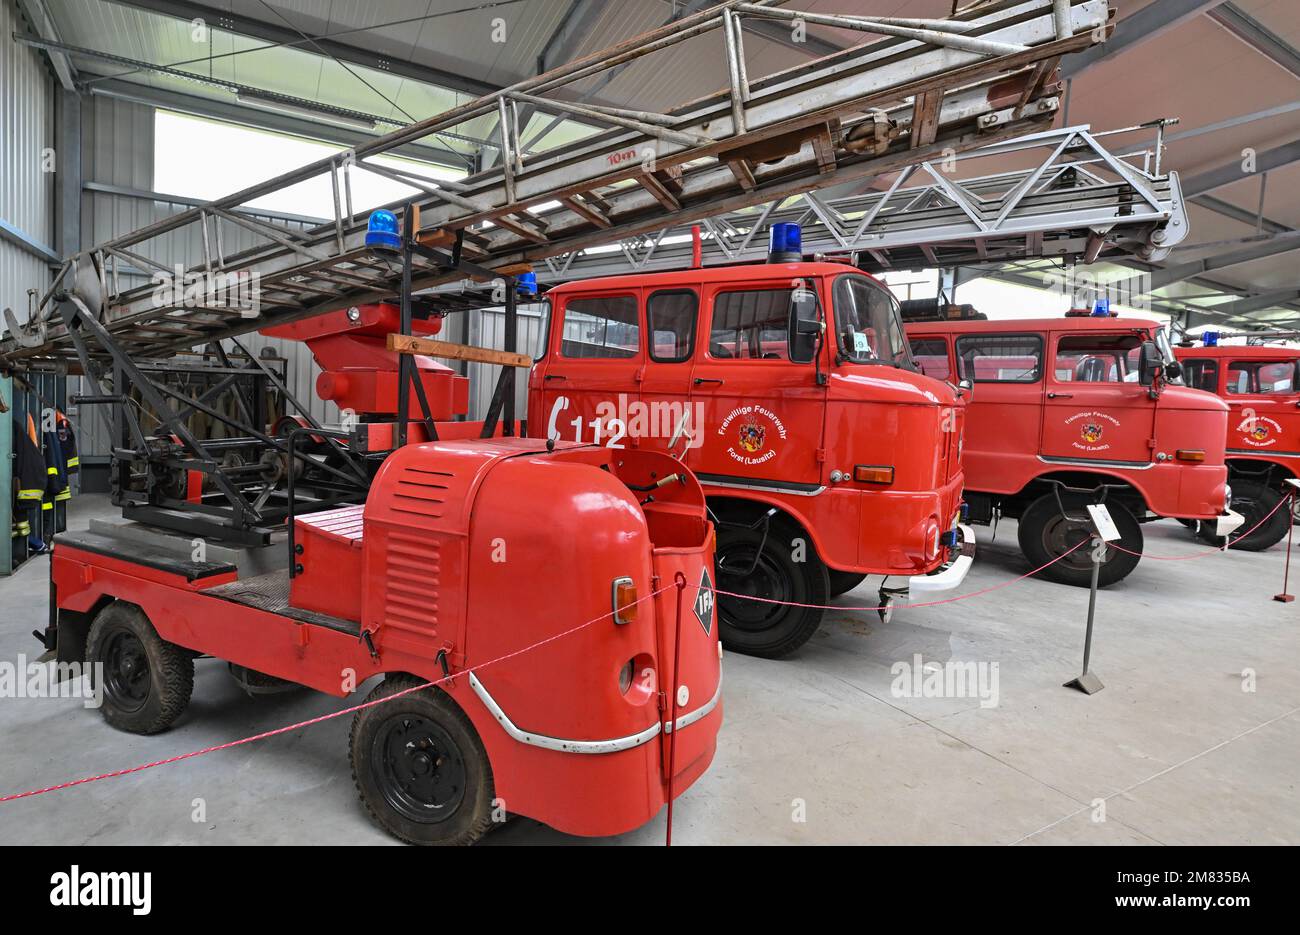 Welzow, Germany. 11th Jan, 2023. Many fire engines stand in an exhibition hall of the fire department museum Welzow e.V. The Welzow Fire Department Park houses one of the largest fire department history collections in Germany. In addition to historic fire engines, equipment and uniforms, all kinds of unique equipment can be admired here, including even a firefighting tank. The museum is always open on weekends from April to October. Credit: Patrick Pleul/dpa/Alamy Live News Stock Photo